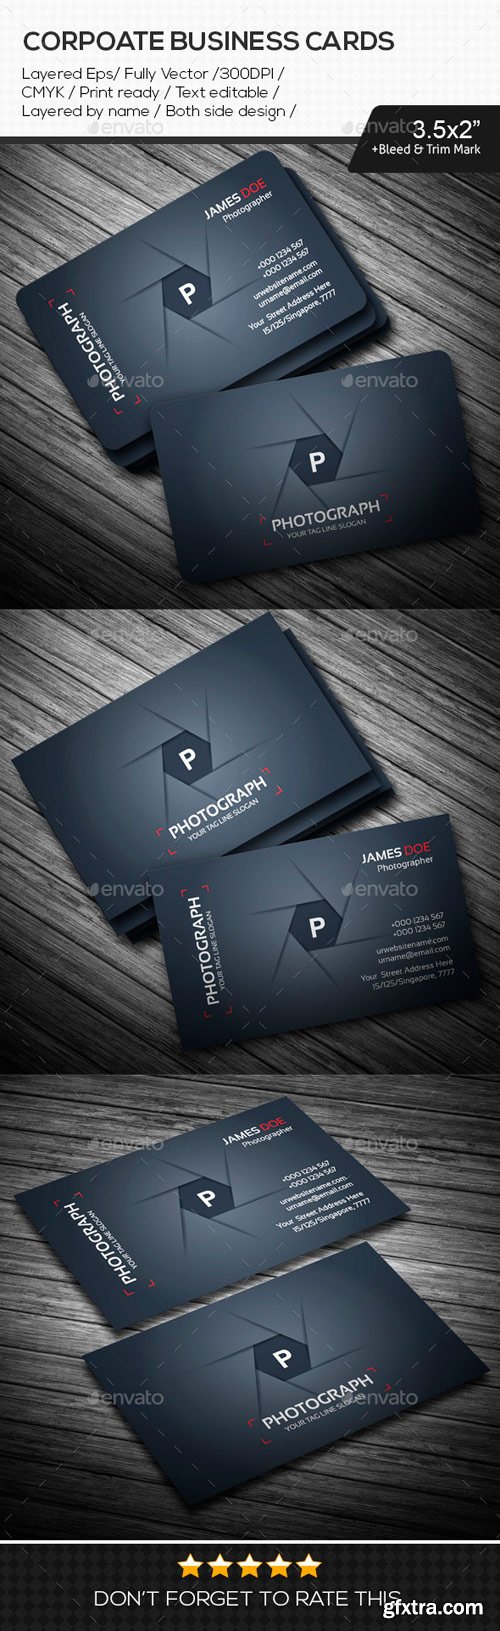 GR - Photograph Corporate Business Cards